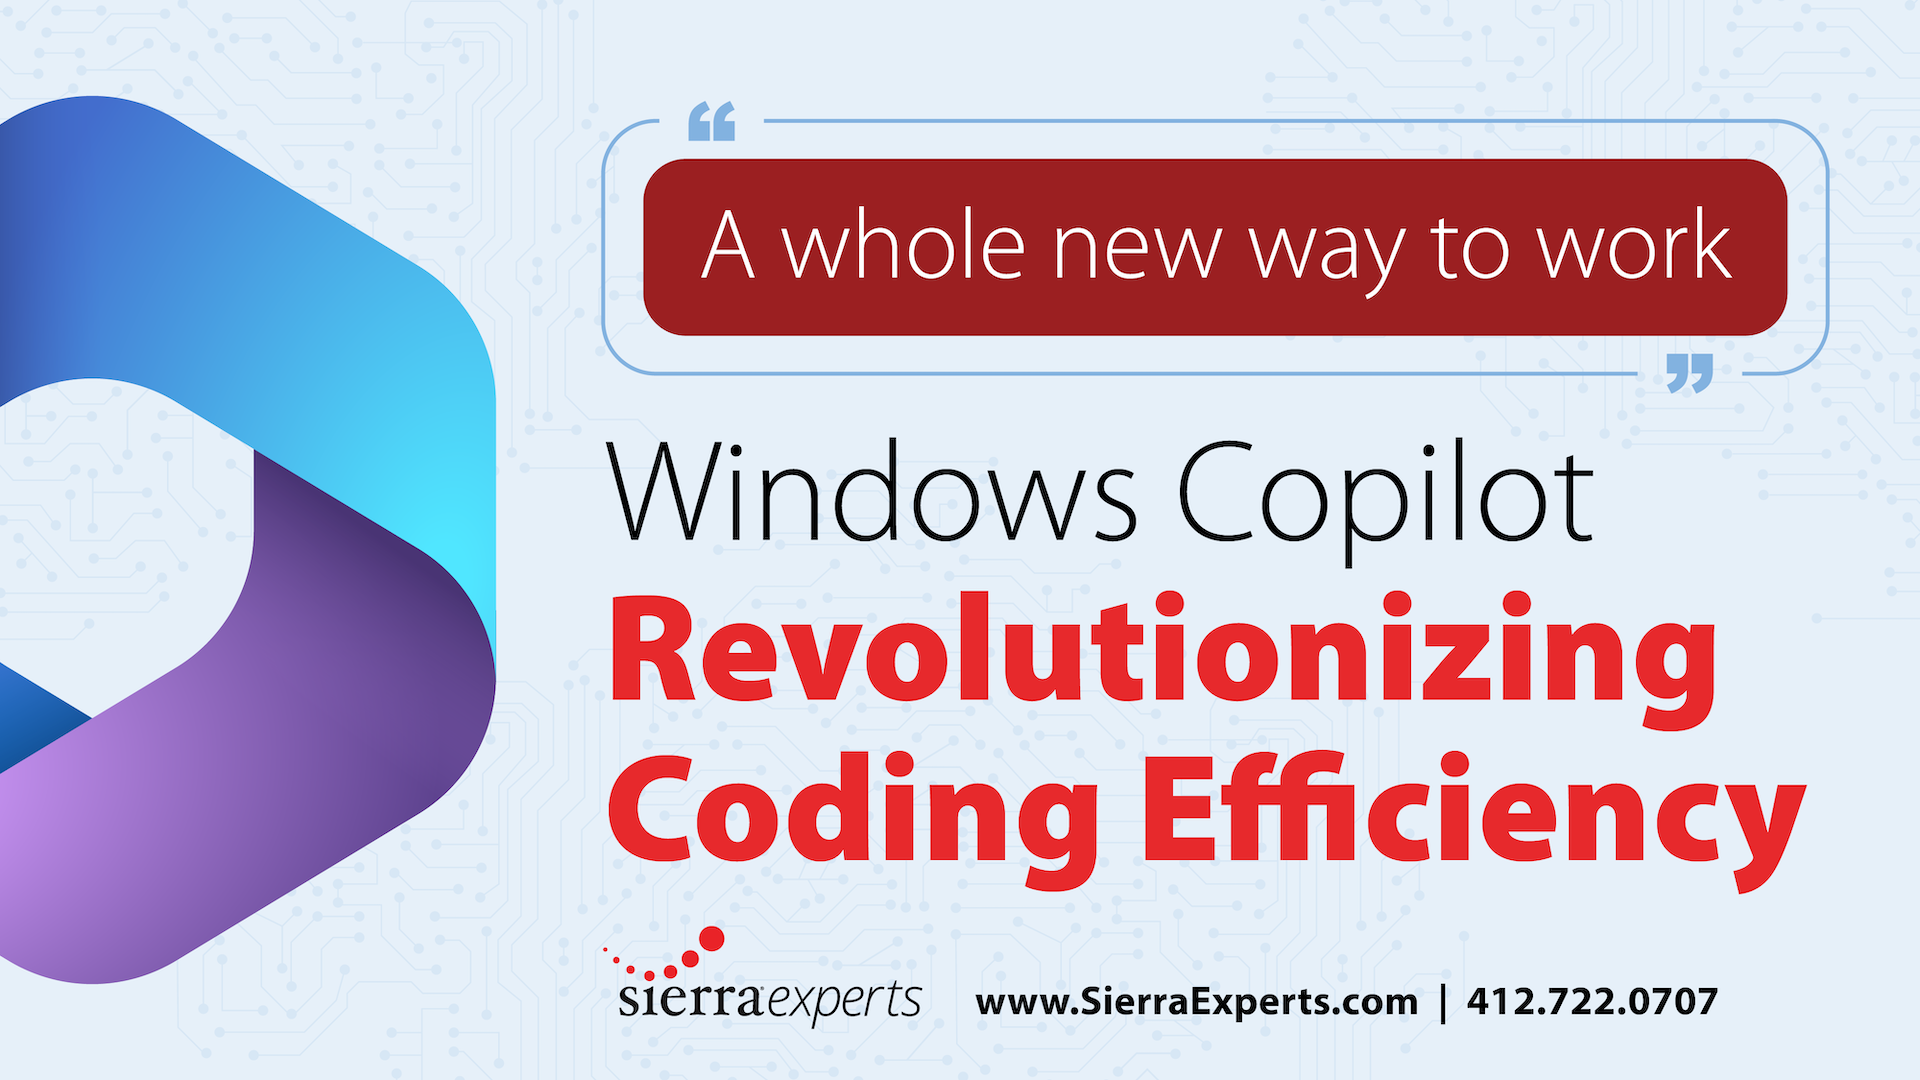 A whole new way to work. Windows Copilot revolutioning coding effifiency